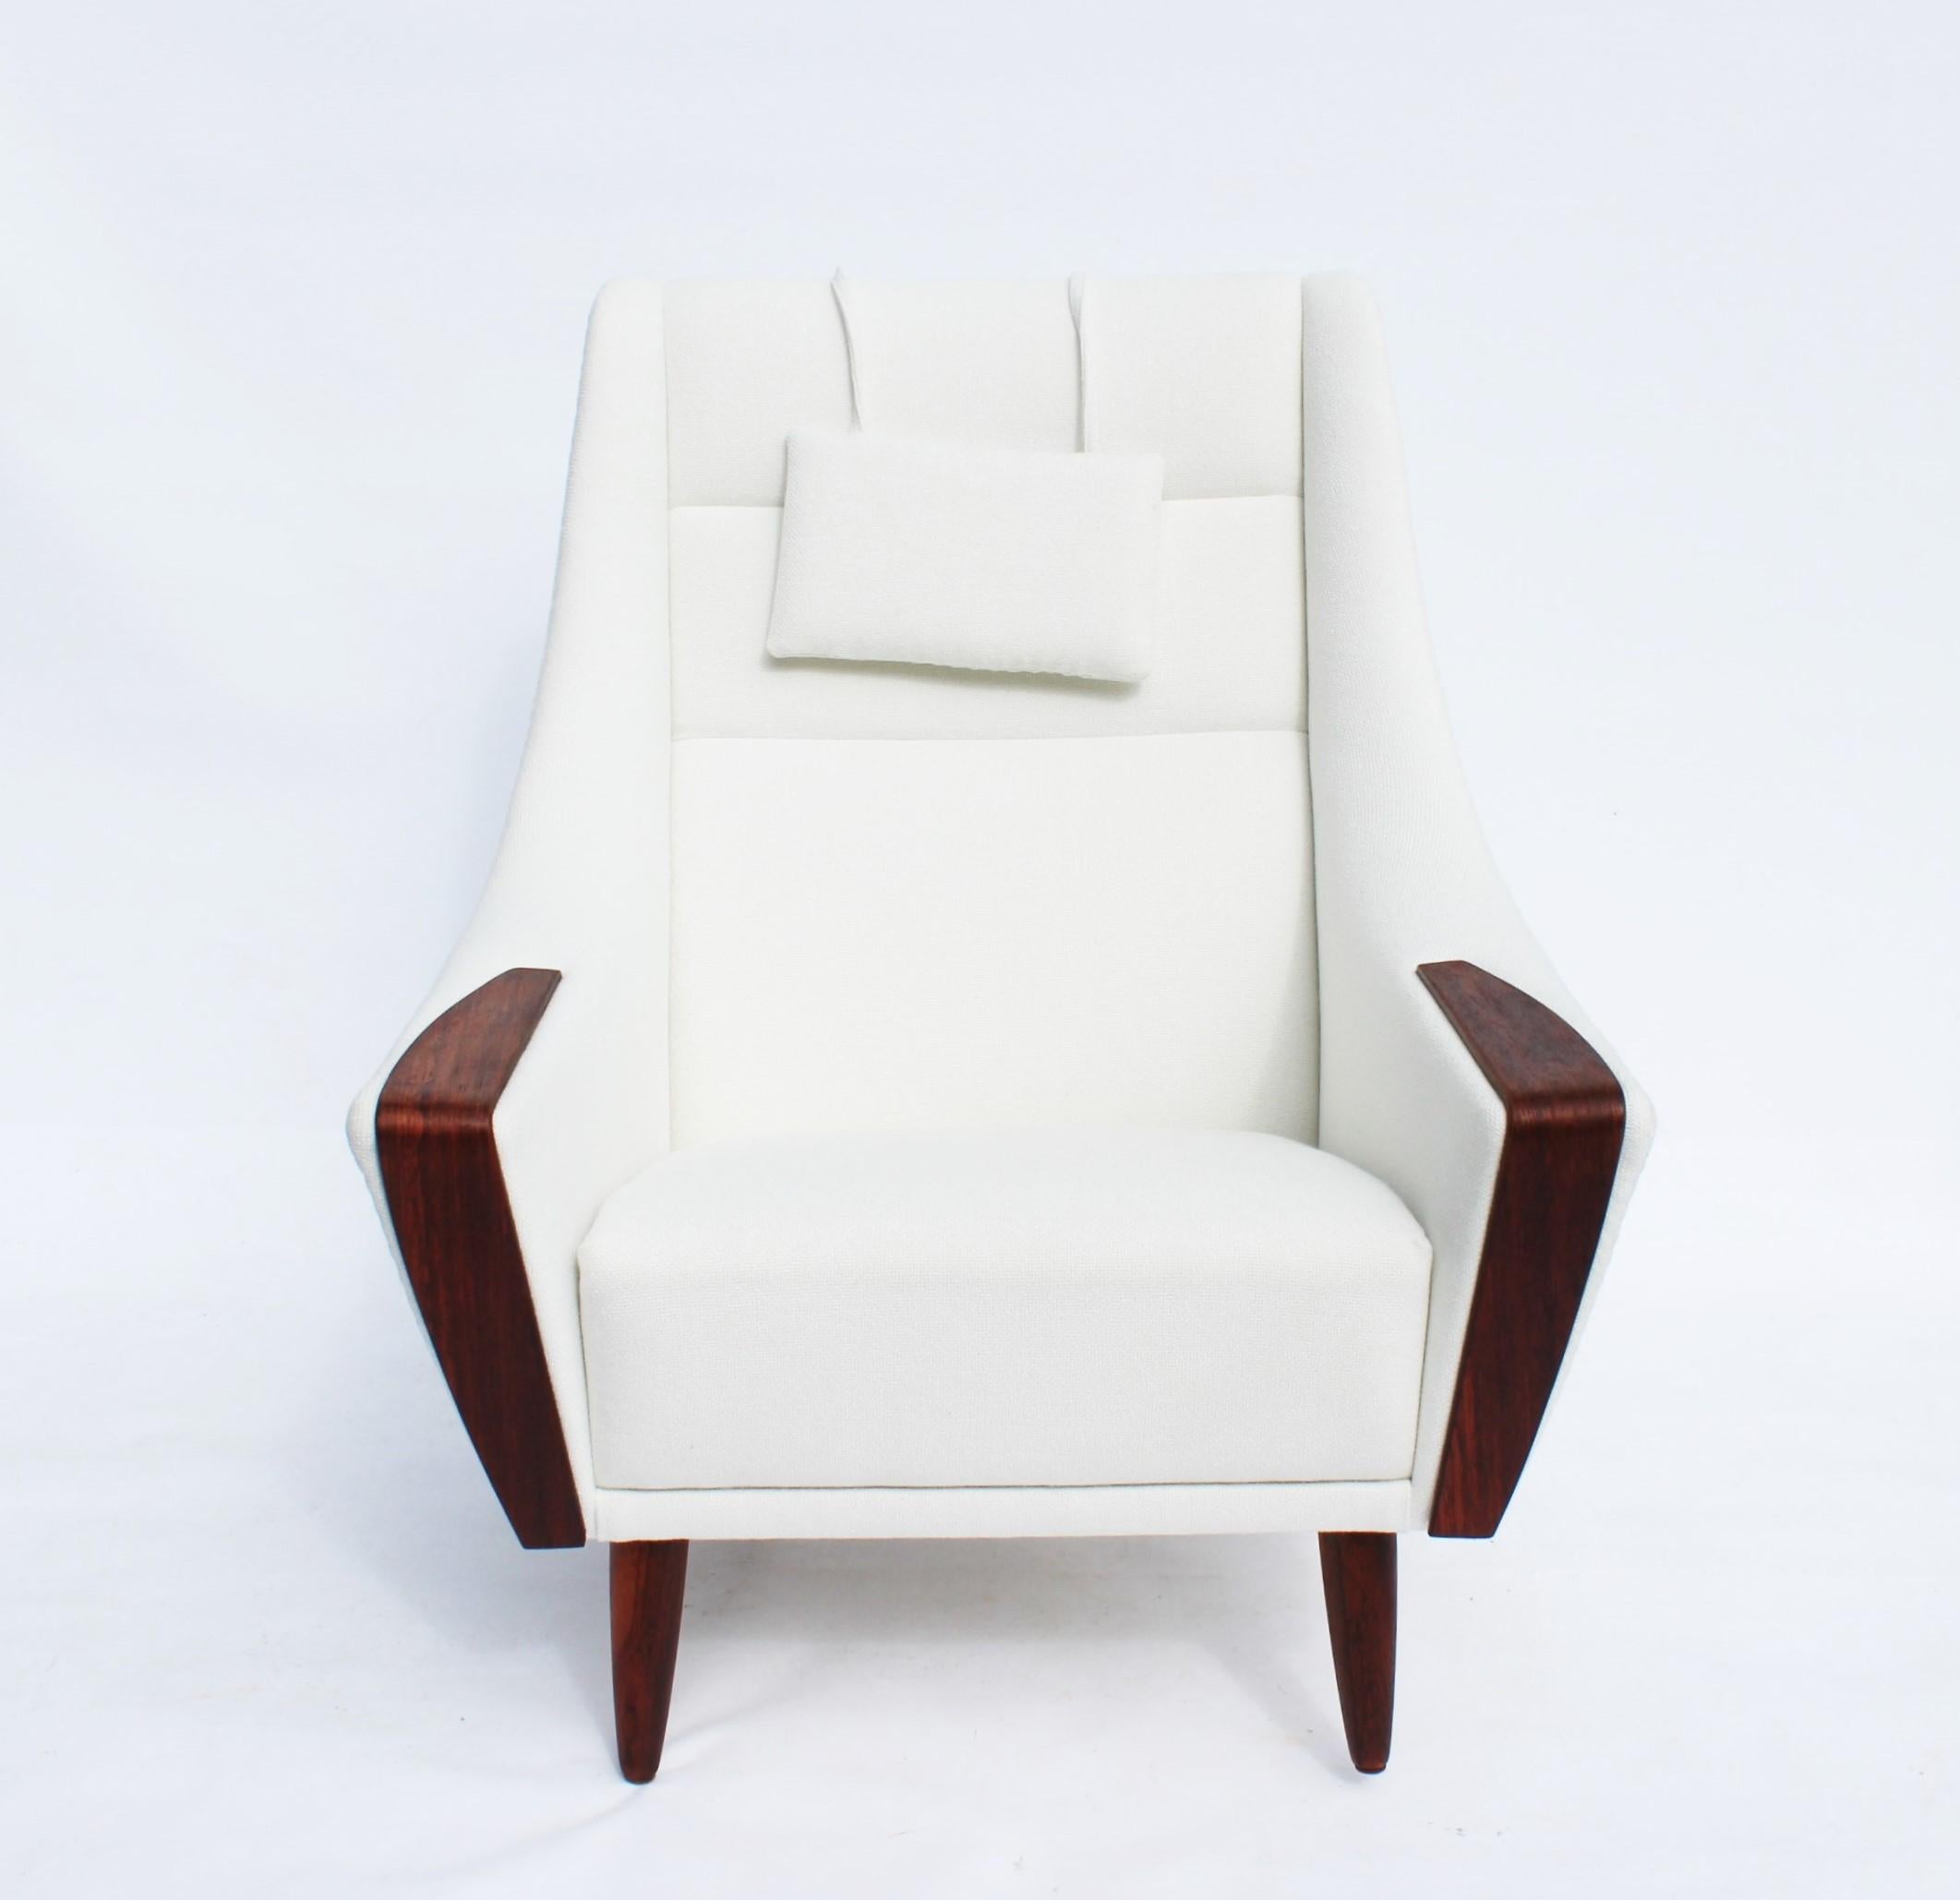 The armchair with a high back, beautifully upholstered in white fabric and elegantly resting on rosewood legs, represents an iconic piece of Danish design from the 1960s. Meticulously restored and reupholstered, this chair is in stunning condition